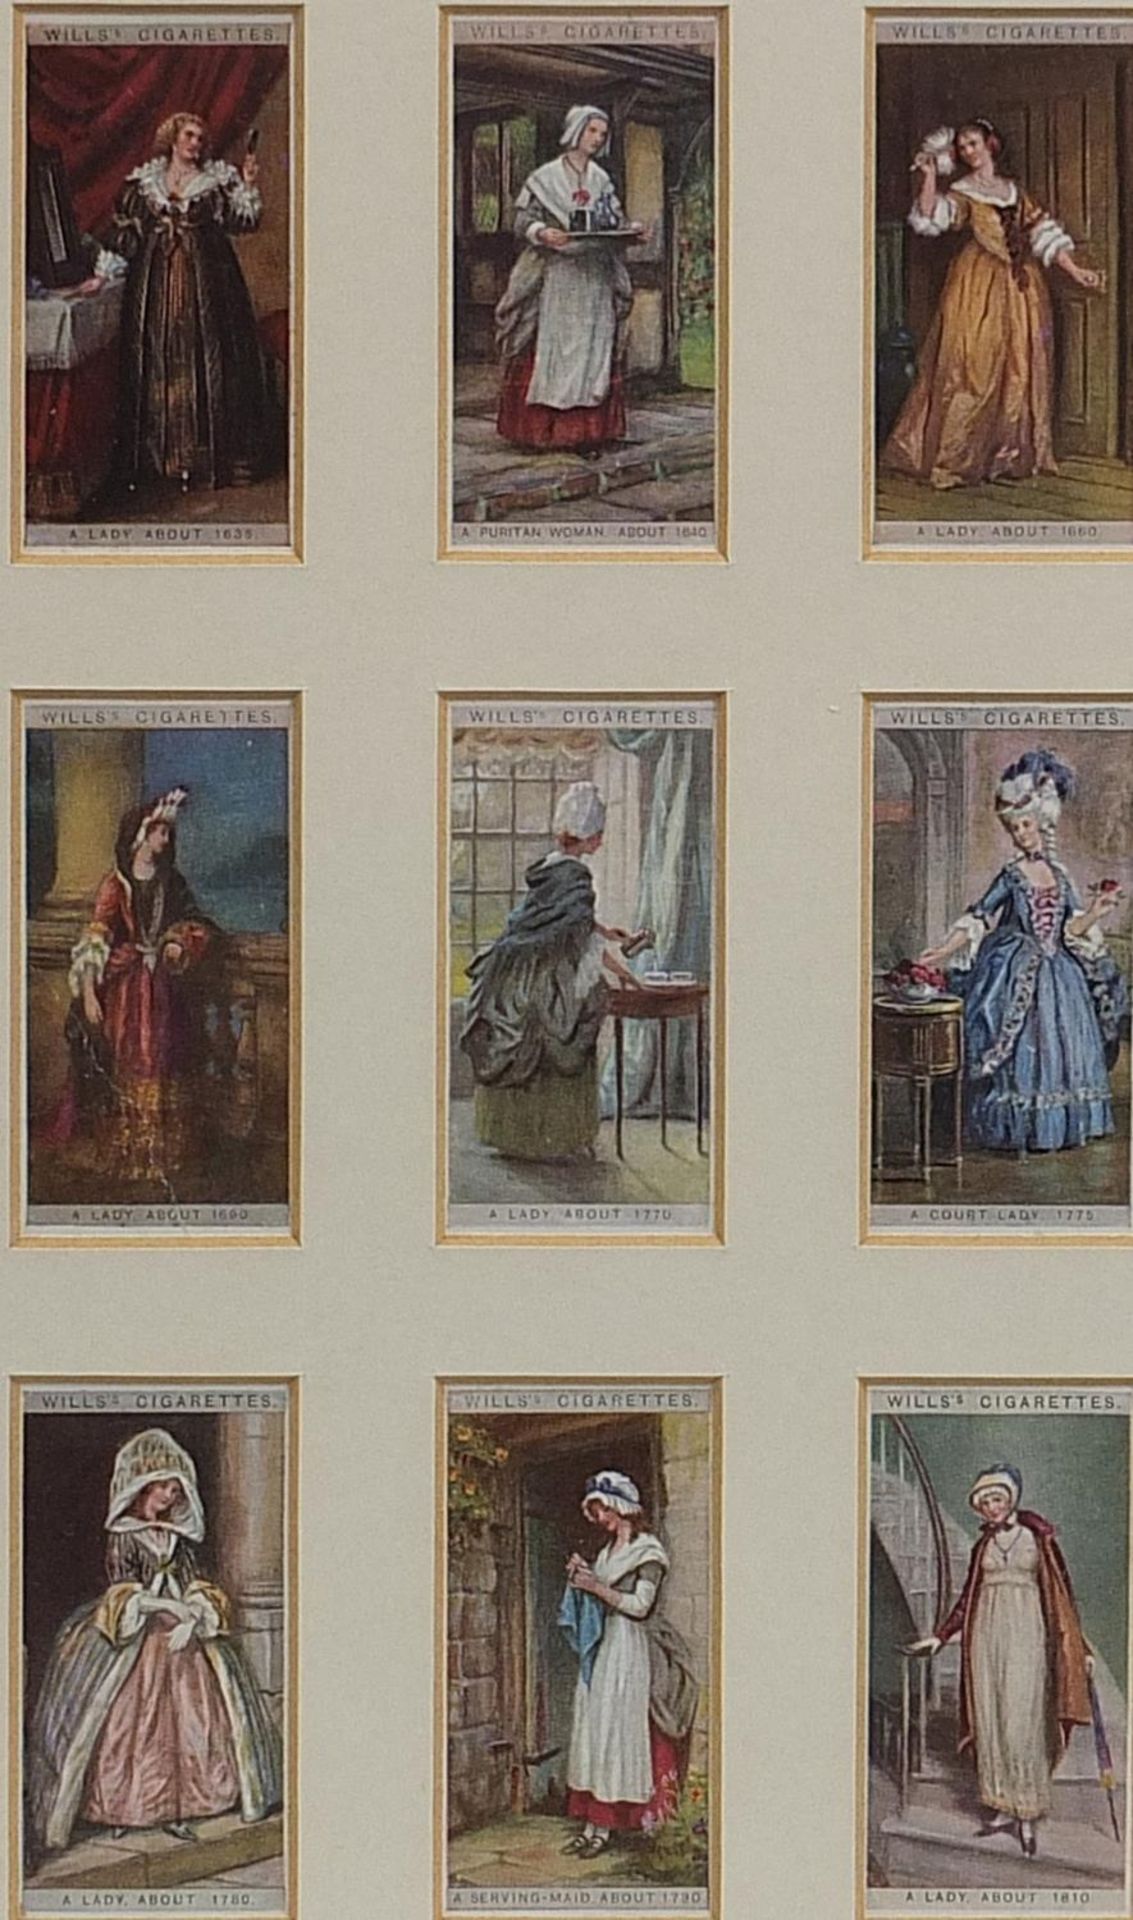 Framed Wills Cigarette cards -English period costumes housed in back and front glass frames, each - Image 6 of 7